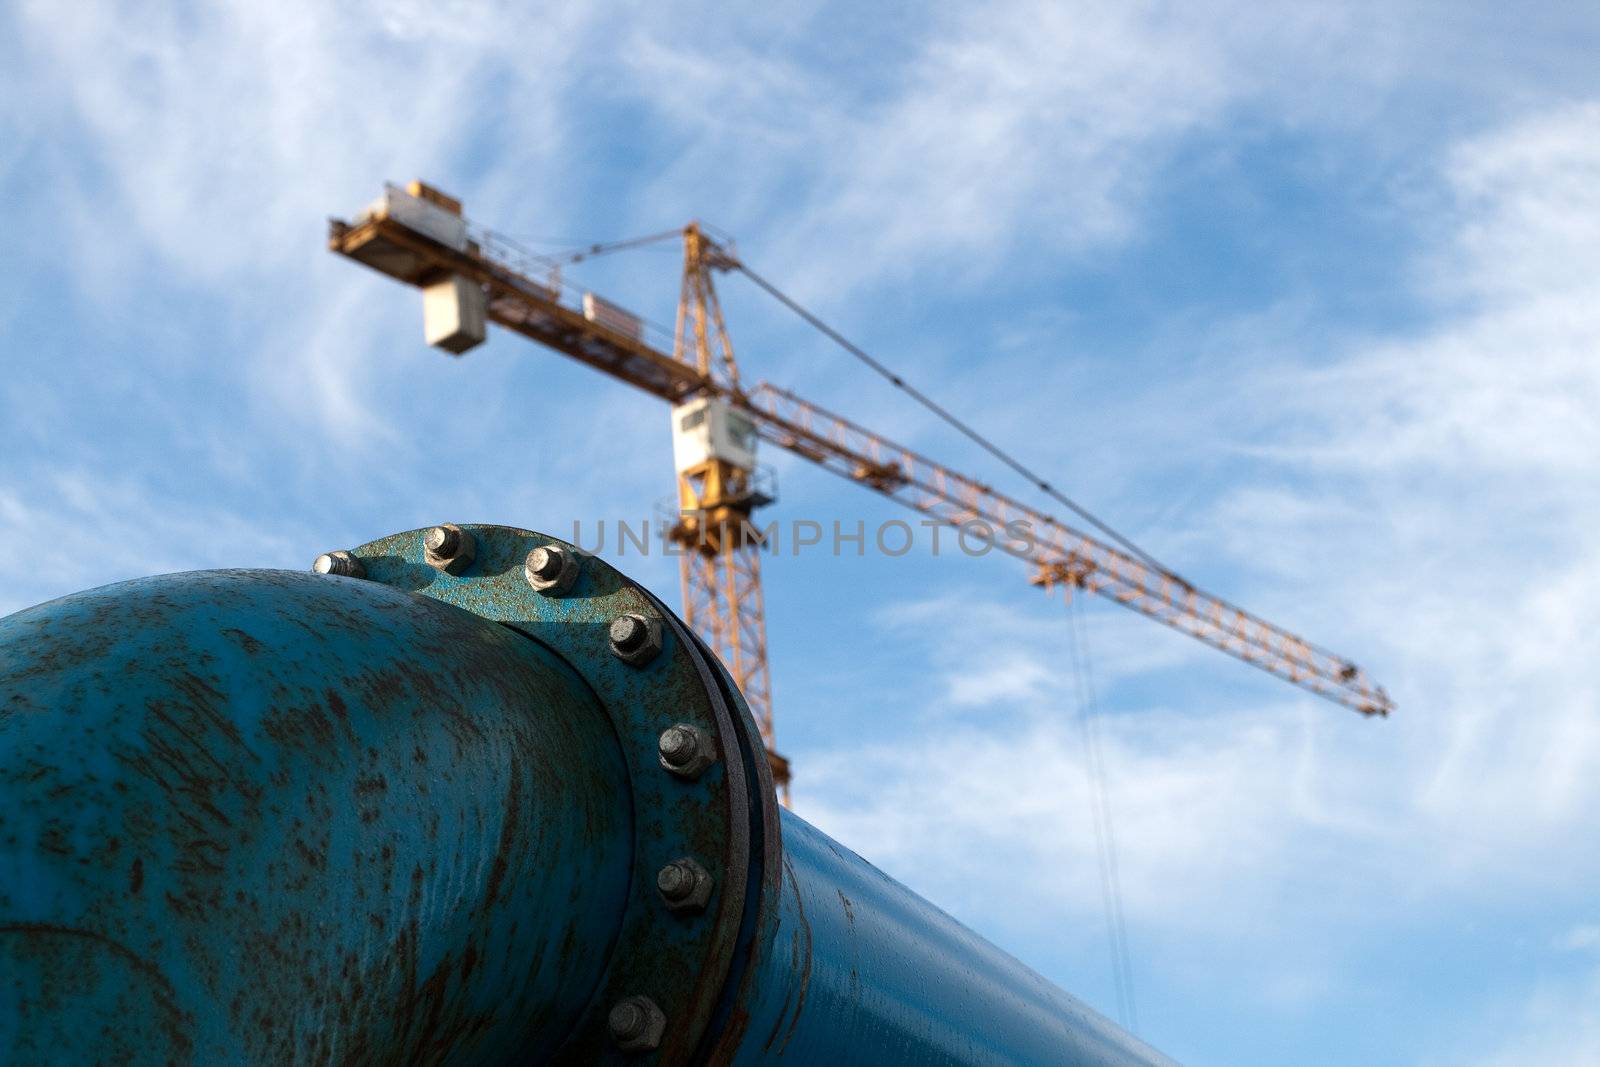 Blue pipelines with bolts at construction site with crane in background